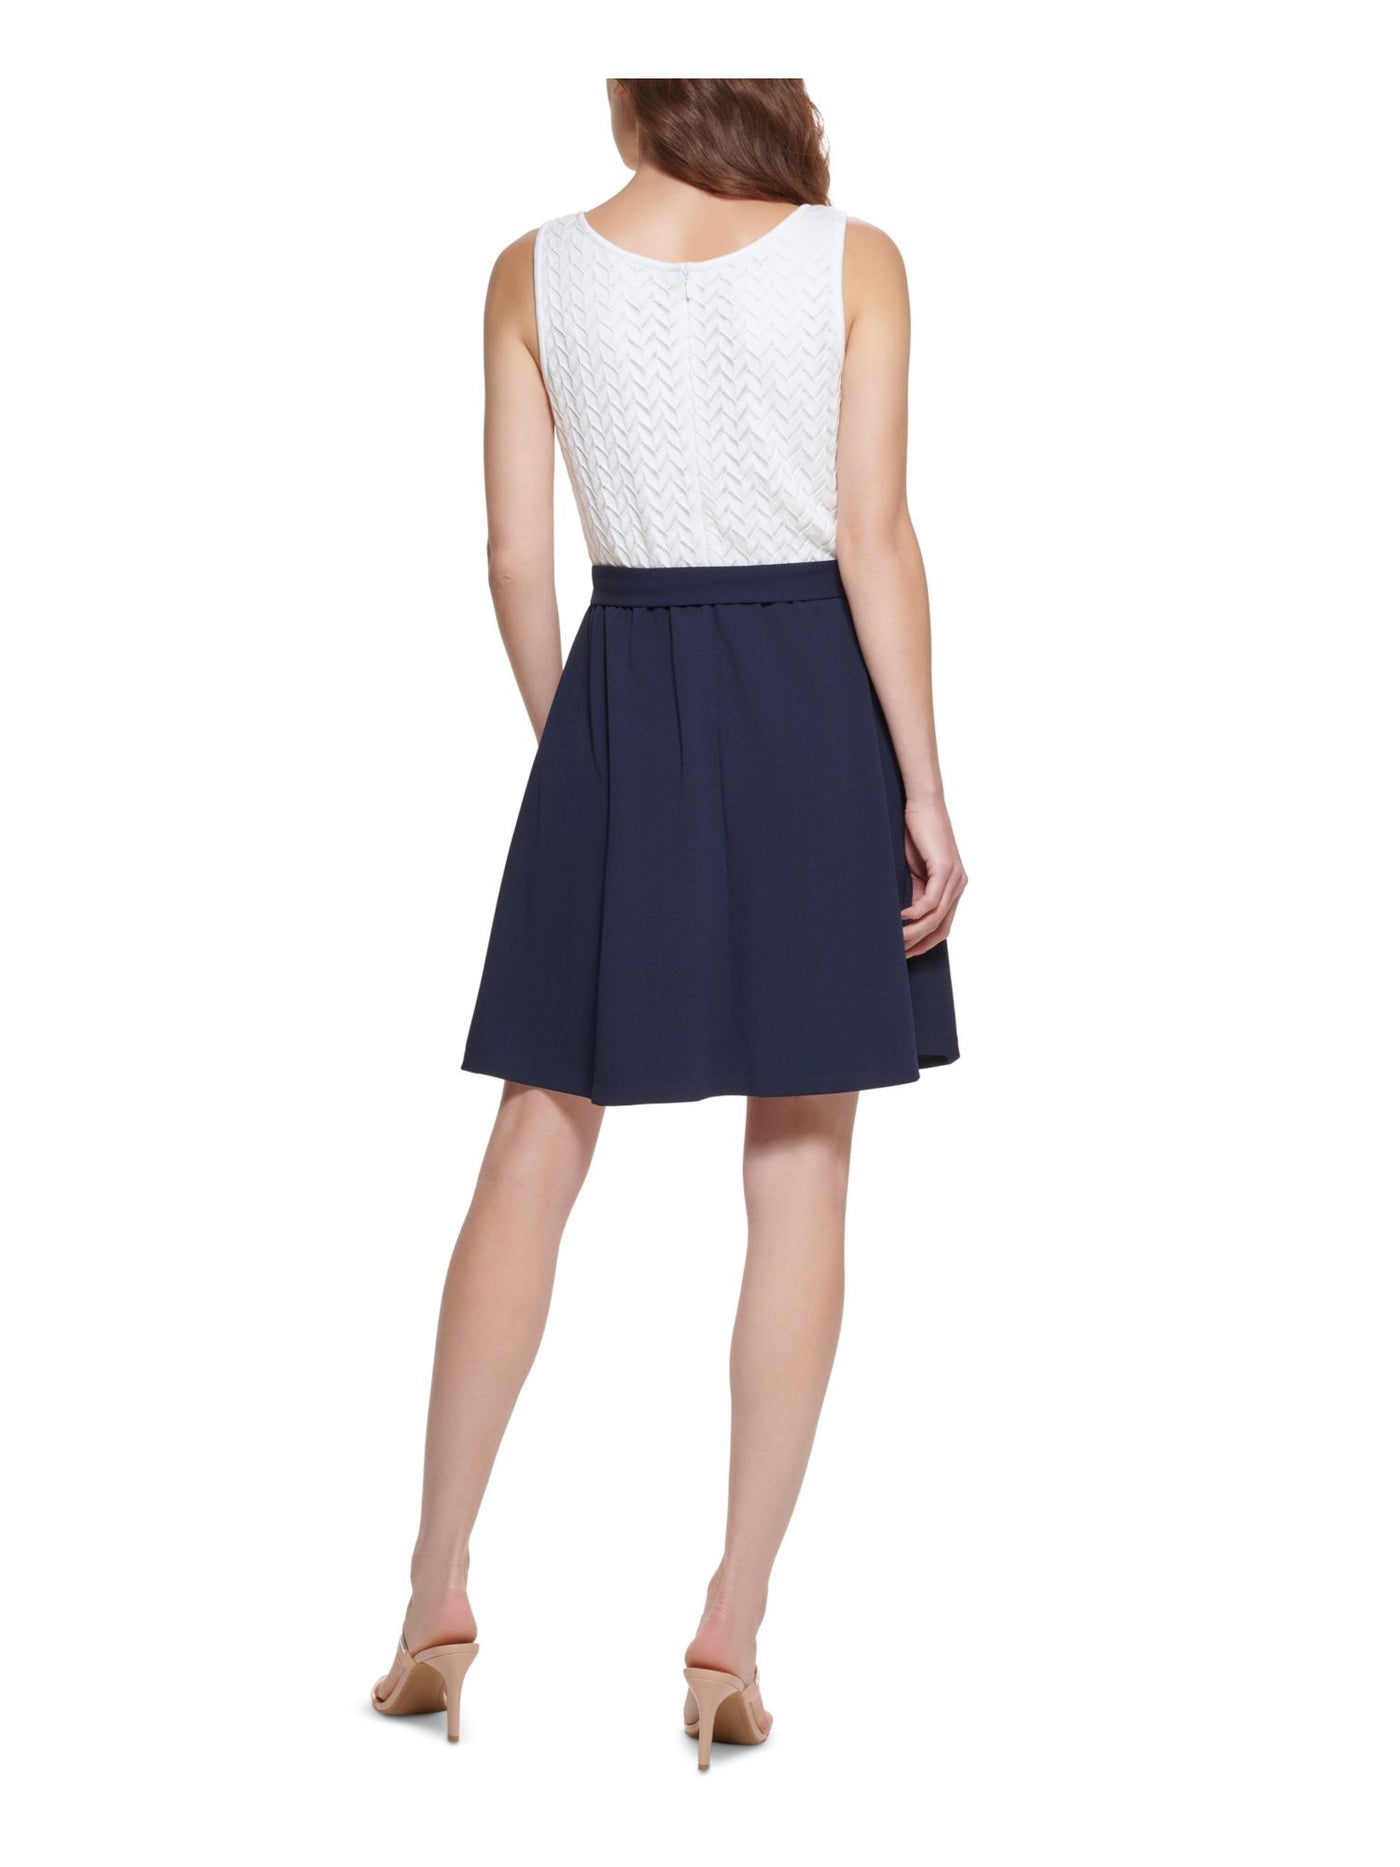 DKNY Womens White Zippered Tie Partially Lined Color Block Sleeveless Round Neck Above The Knee Fit + Flare Dress 8